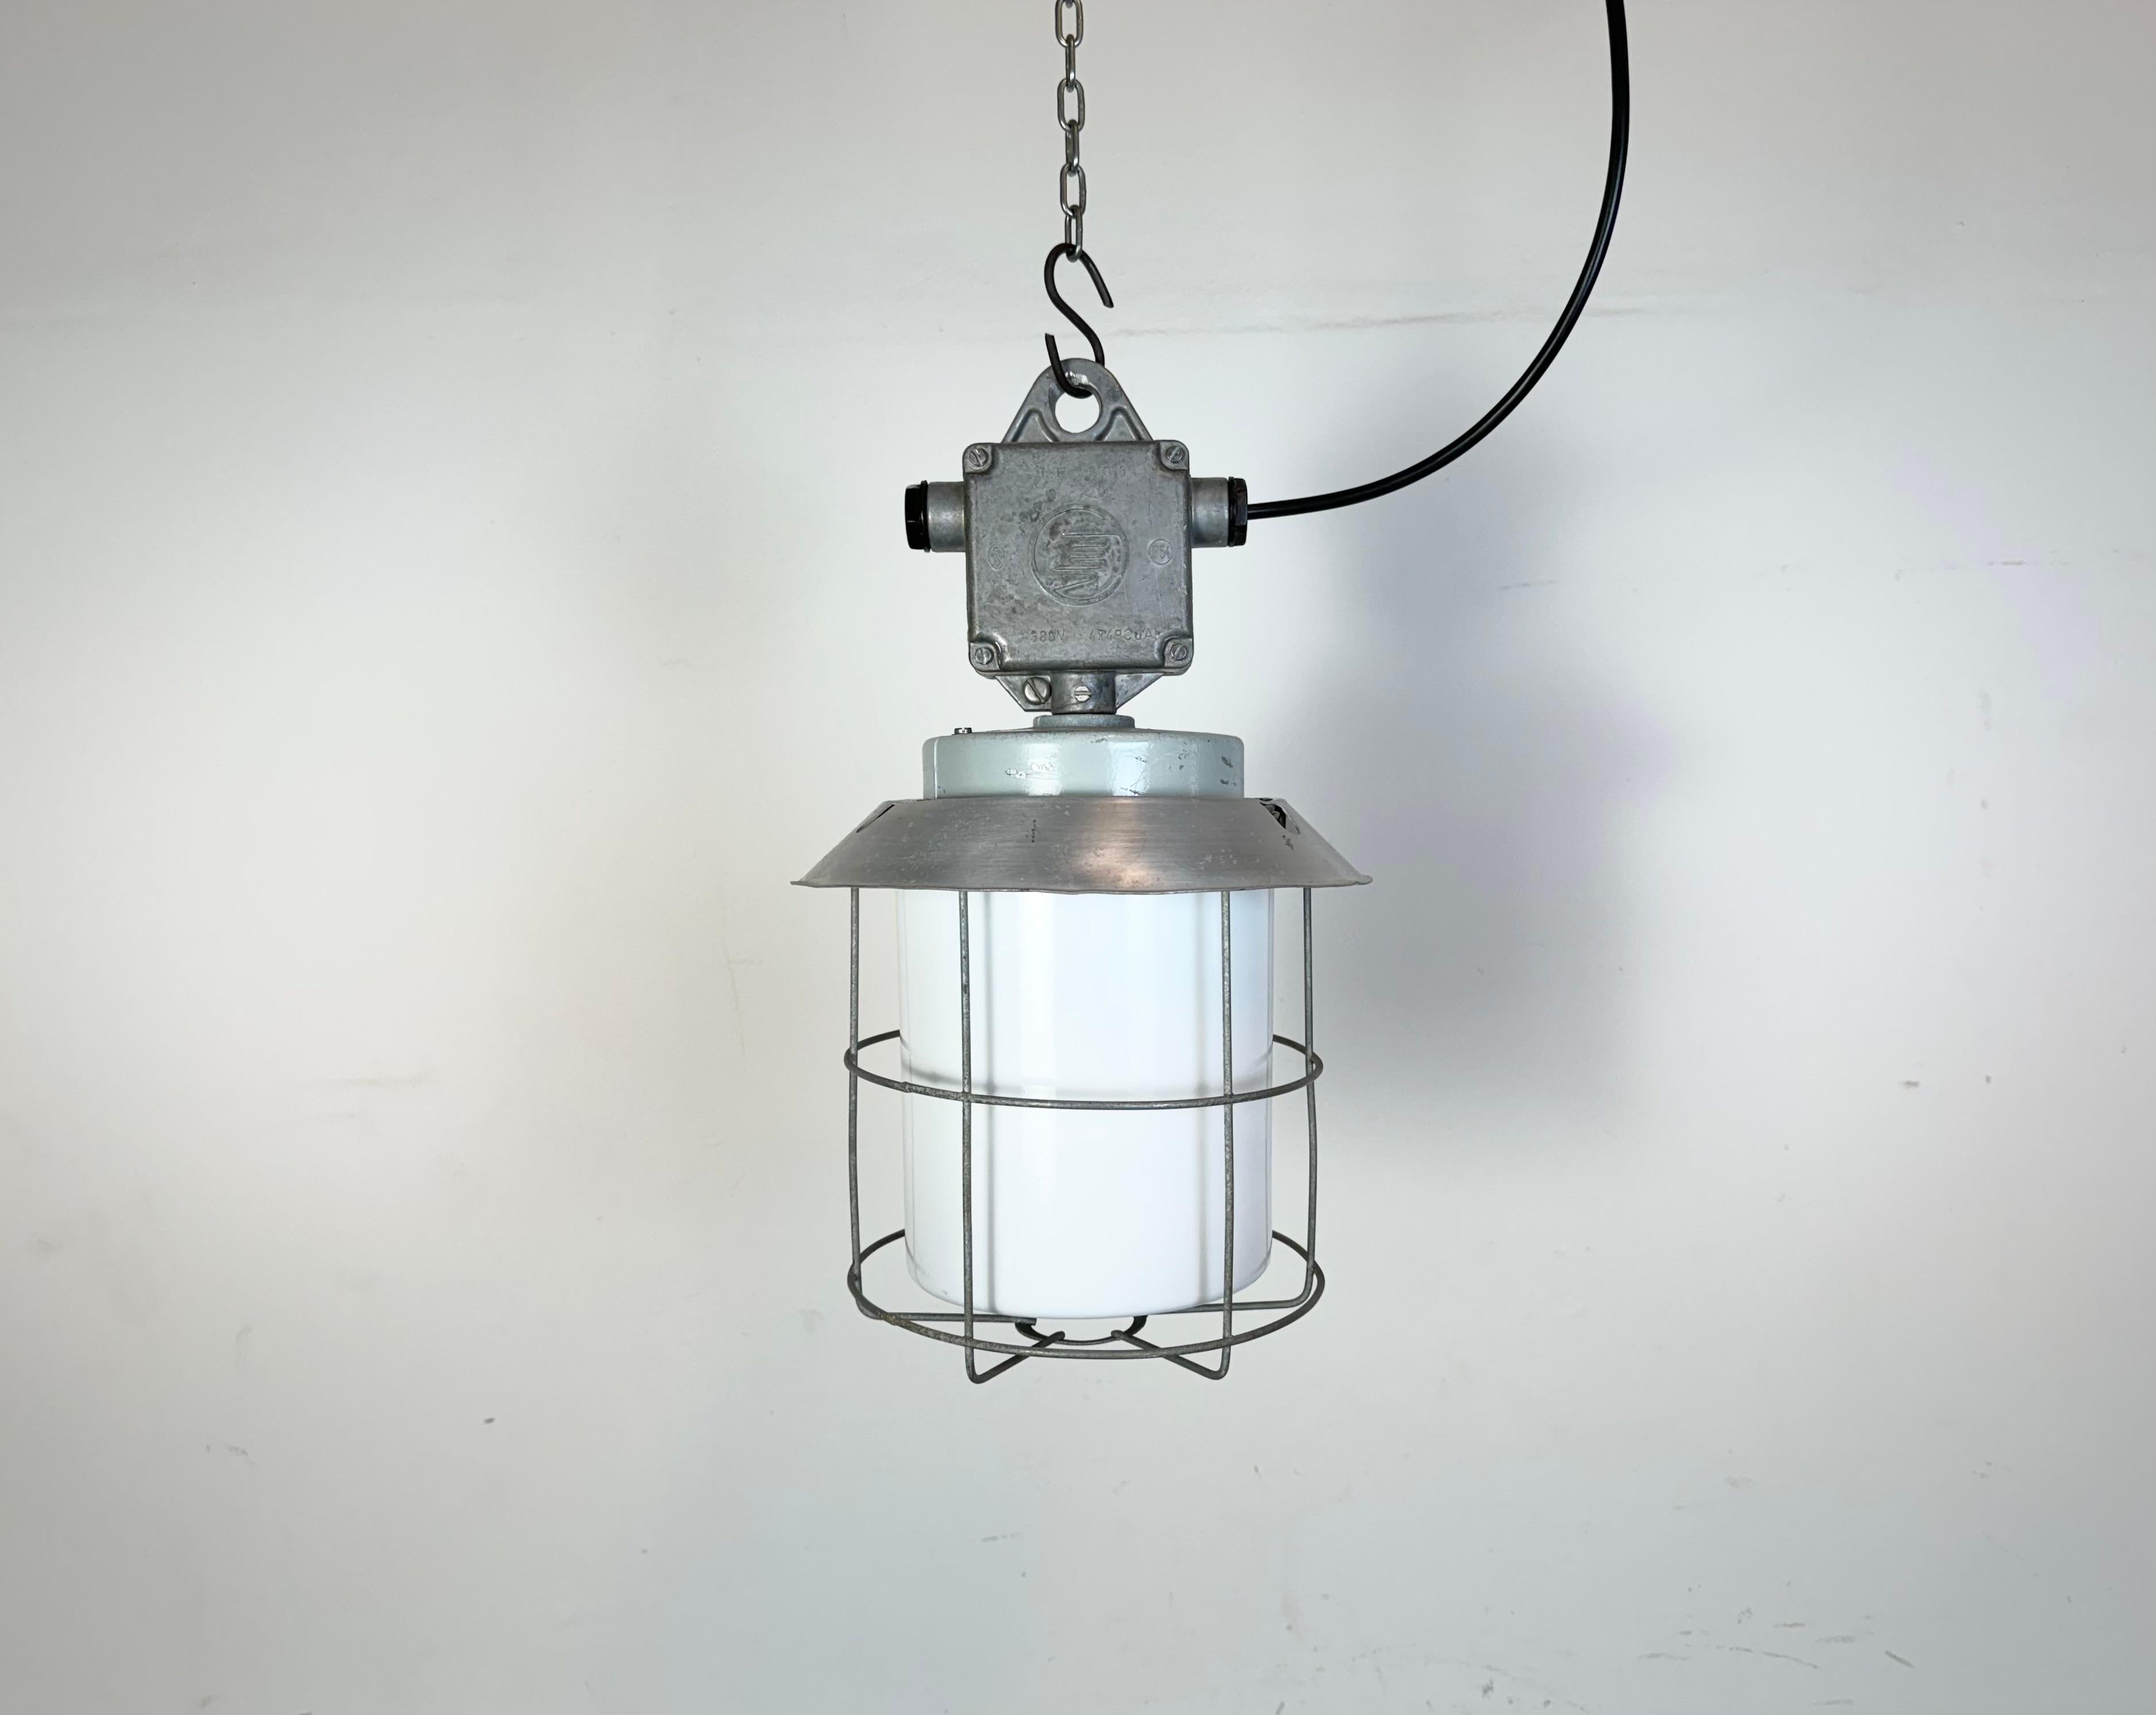 This Industrial hanging light was made by Elektrosvit in former Czechoslovakia during the 1970s. It features a cast aluminium top, an aluminium shade a milk glass and an iron grig. New porcelain socket requires standard E 27/ E26 light bulbs. New